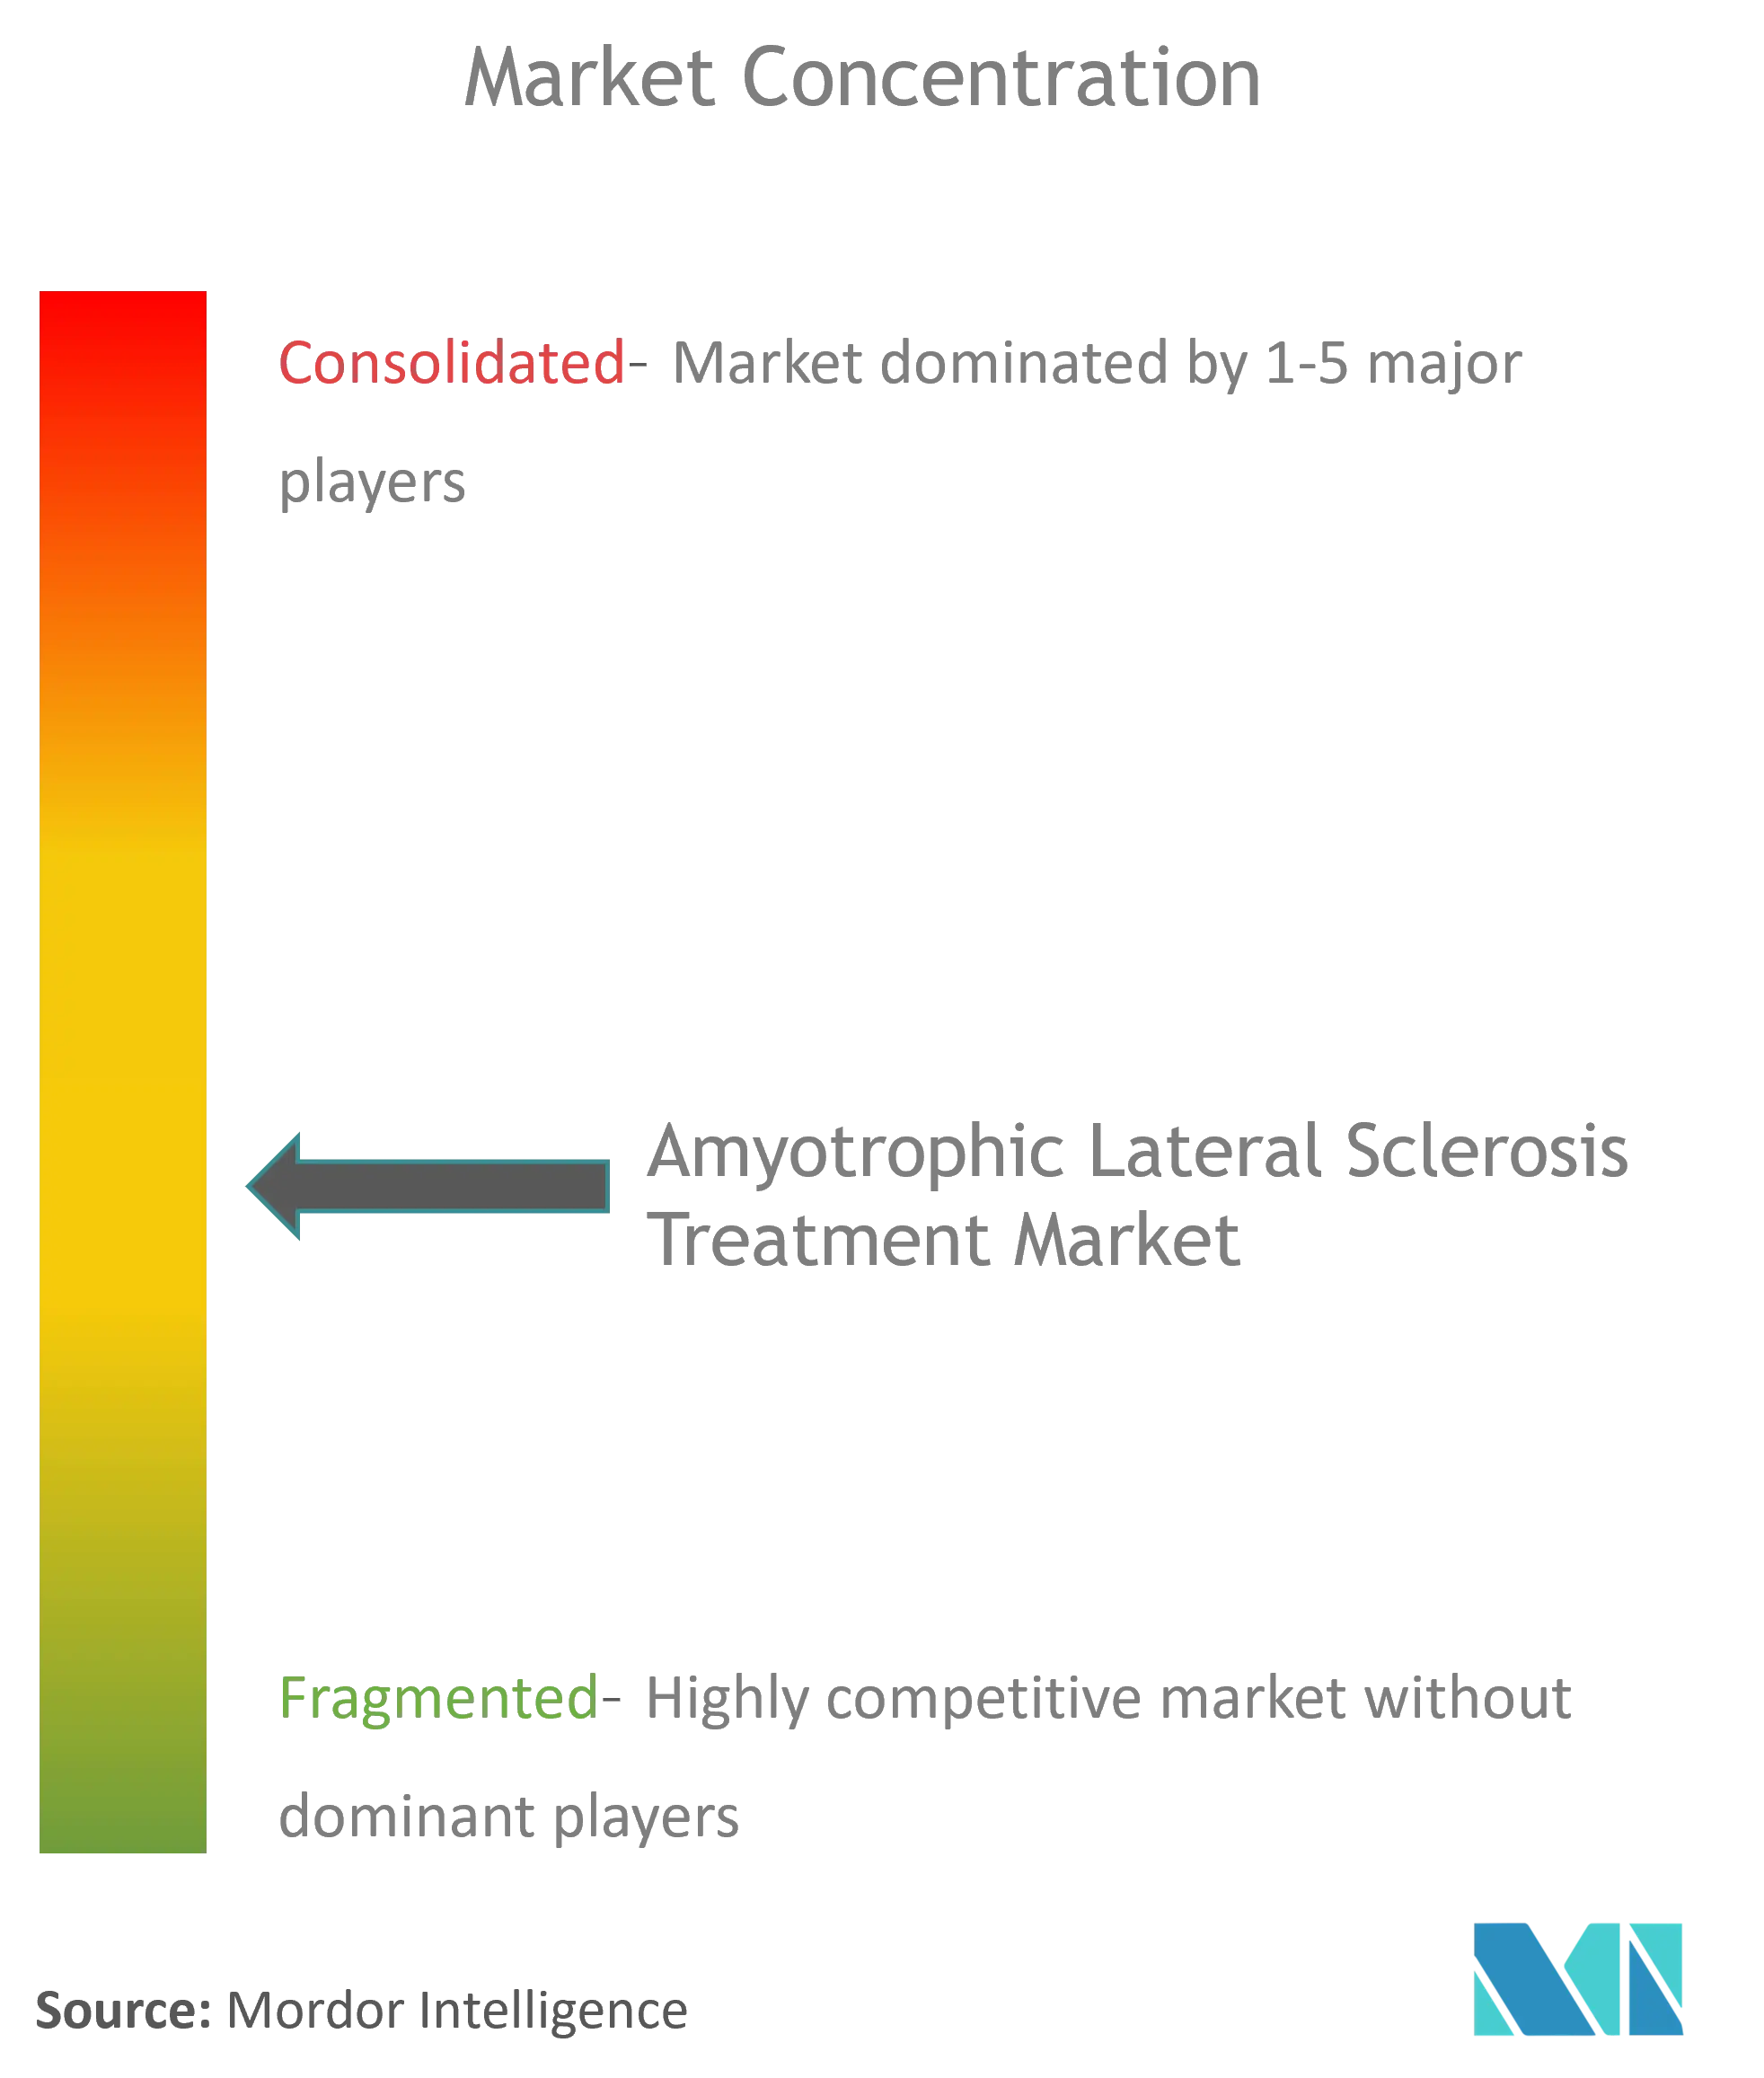 Amyotrophic Lateral Sclerosis Treatment Market Concentration